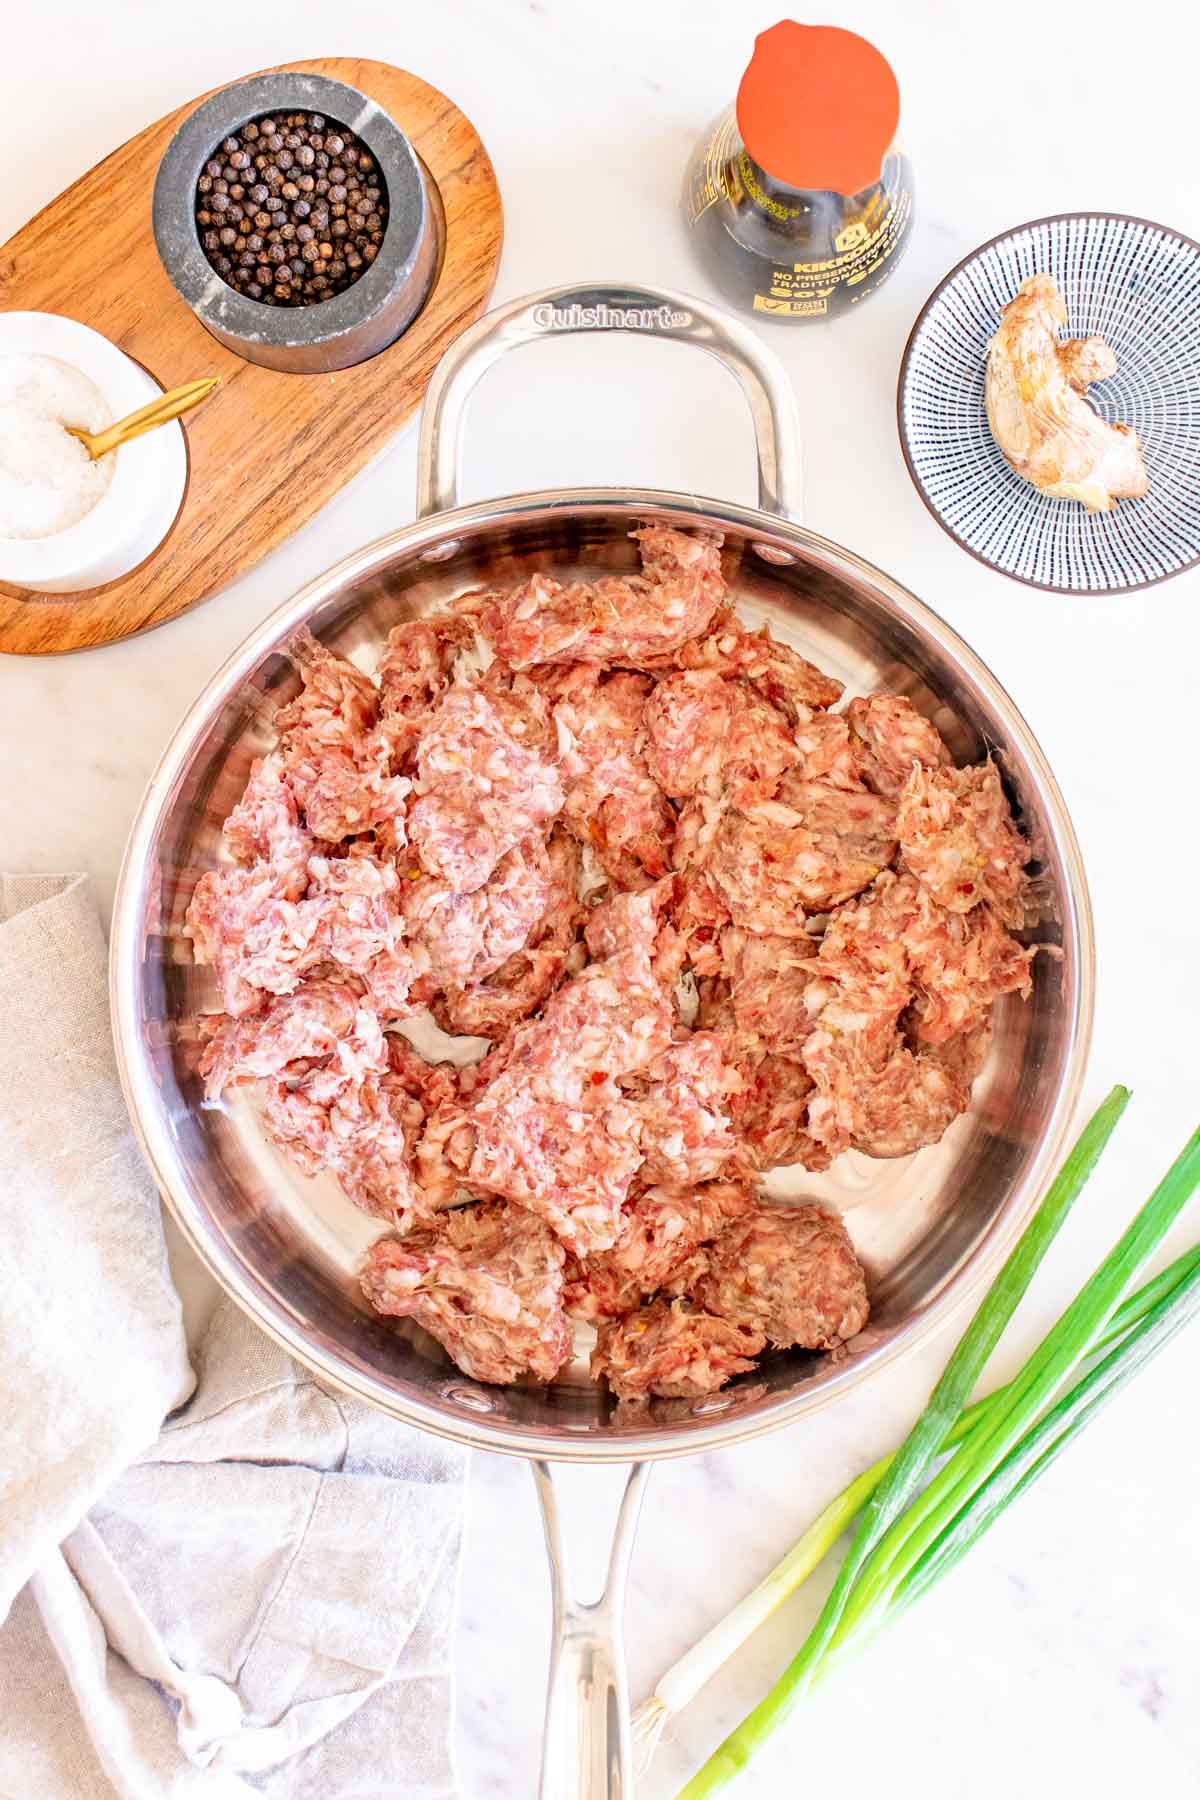 A frying pan with meat, onions and other ingredients.